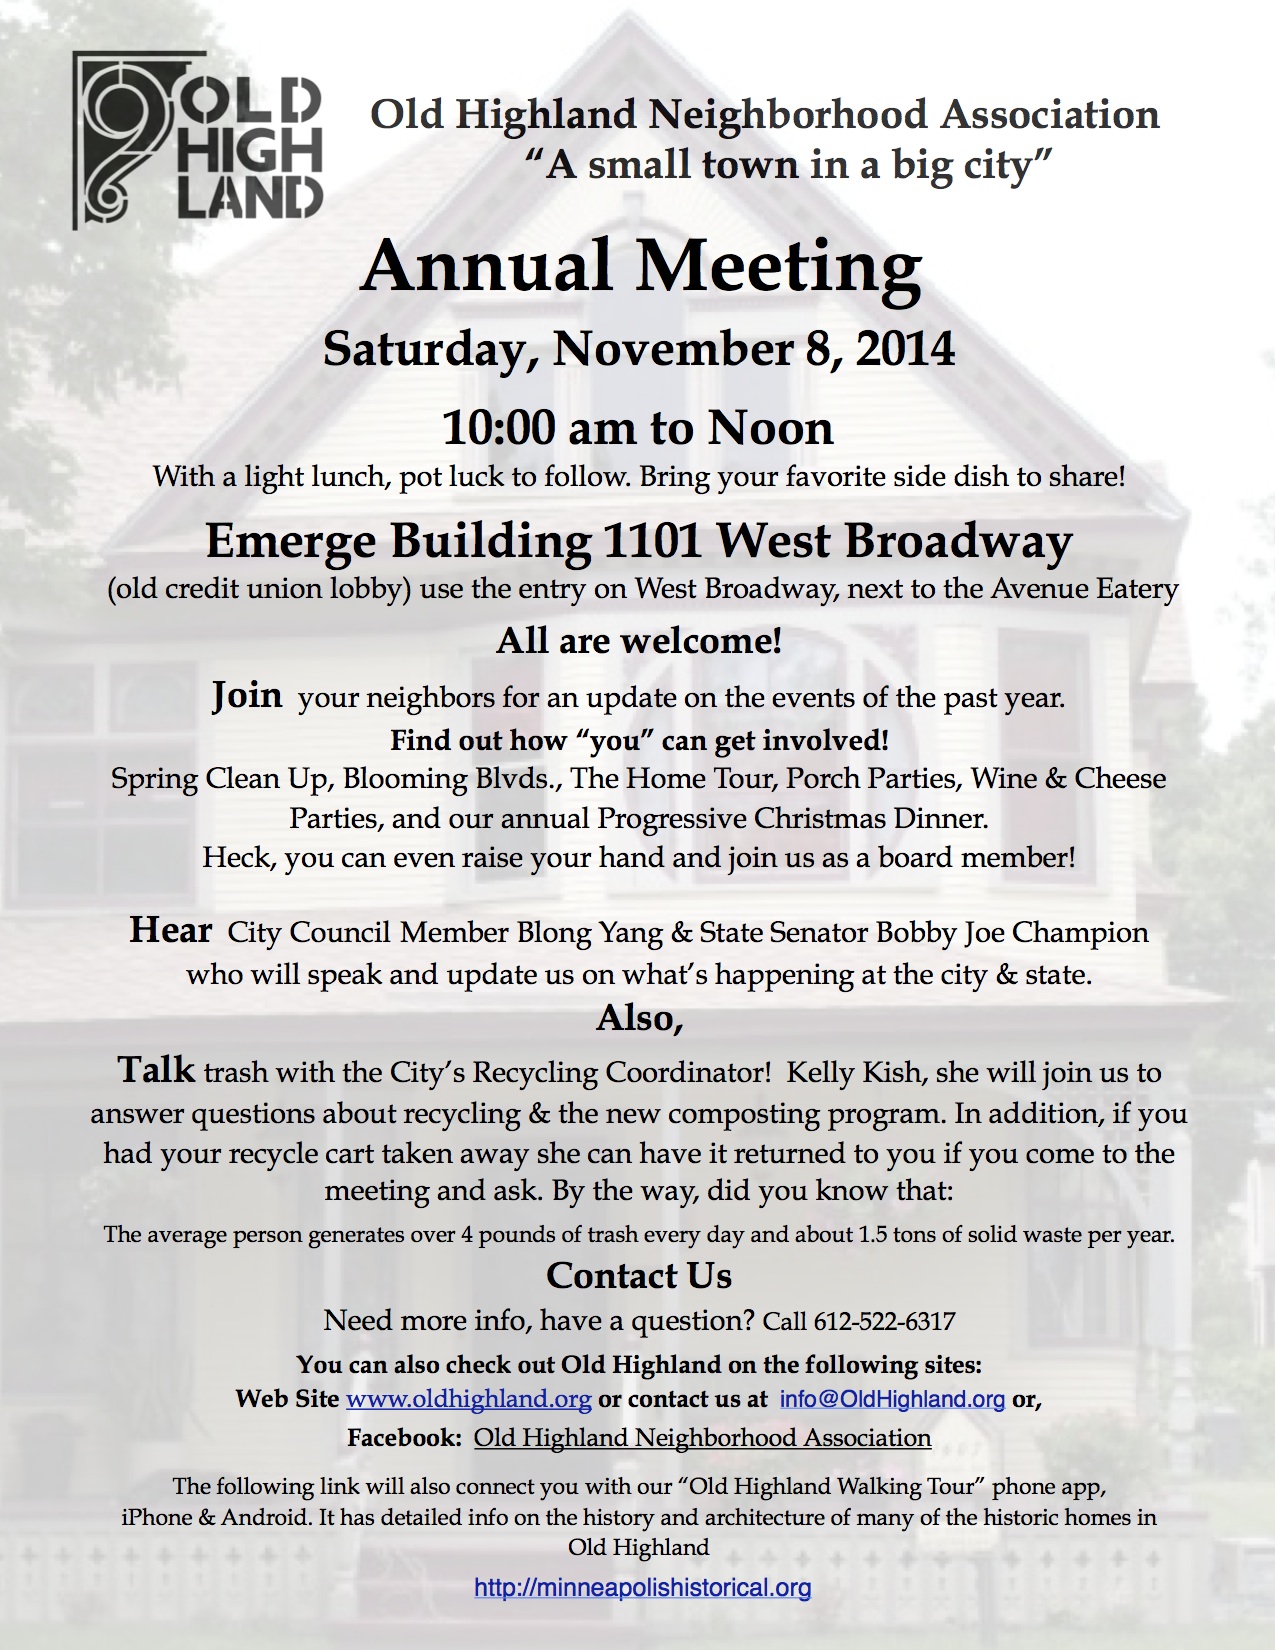 Annual Meeting Flyer 2014